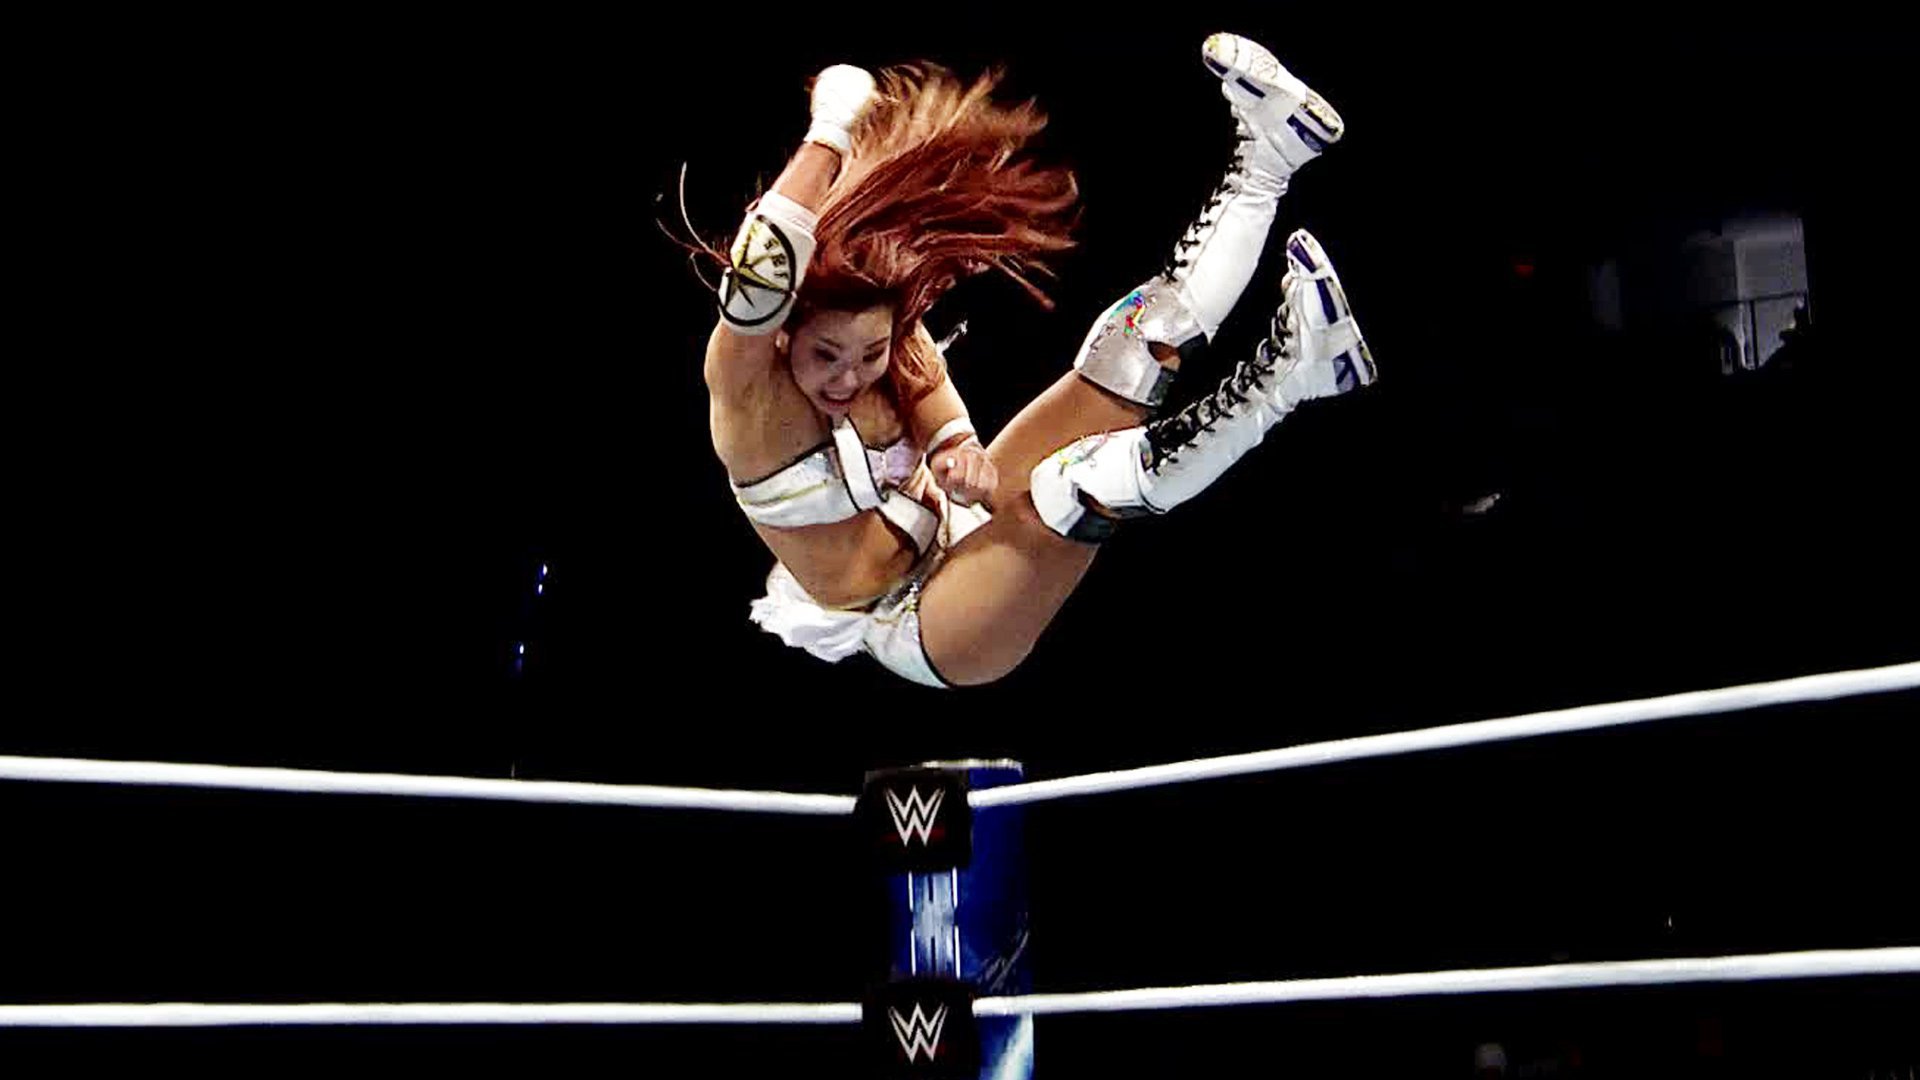 From the RKO, to the Stunner, to the Tombstone Piledriver